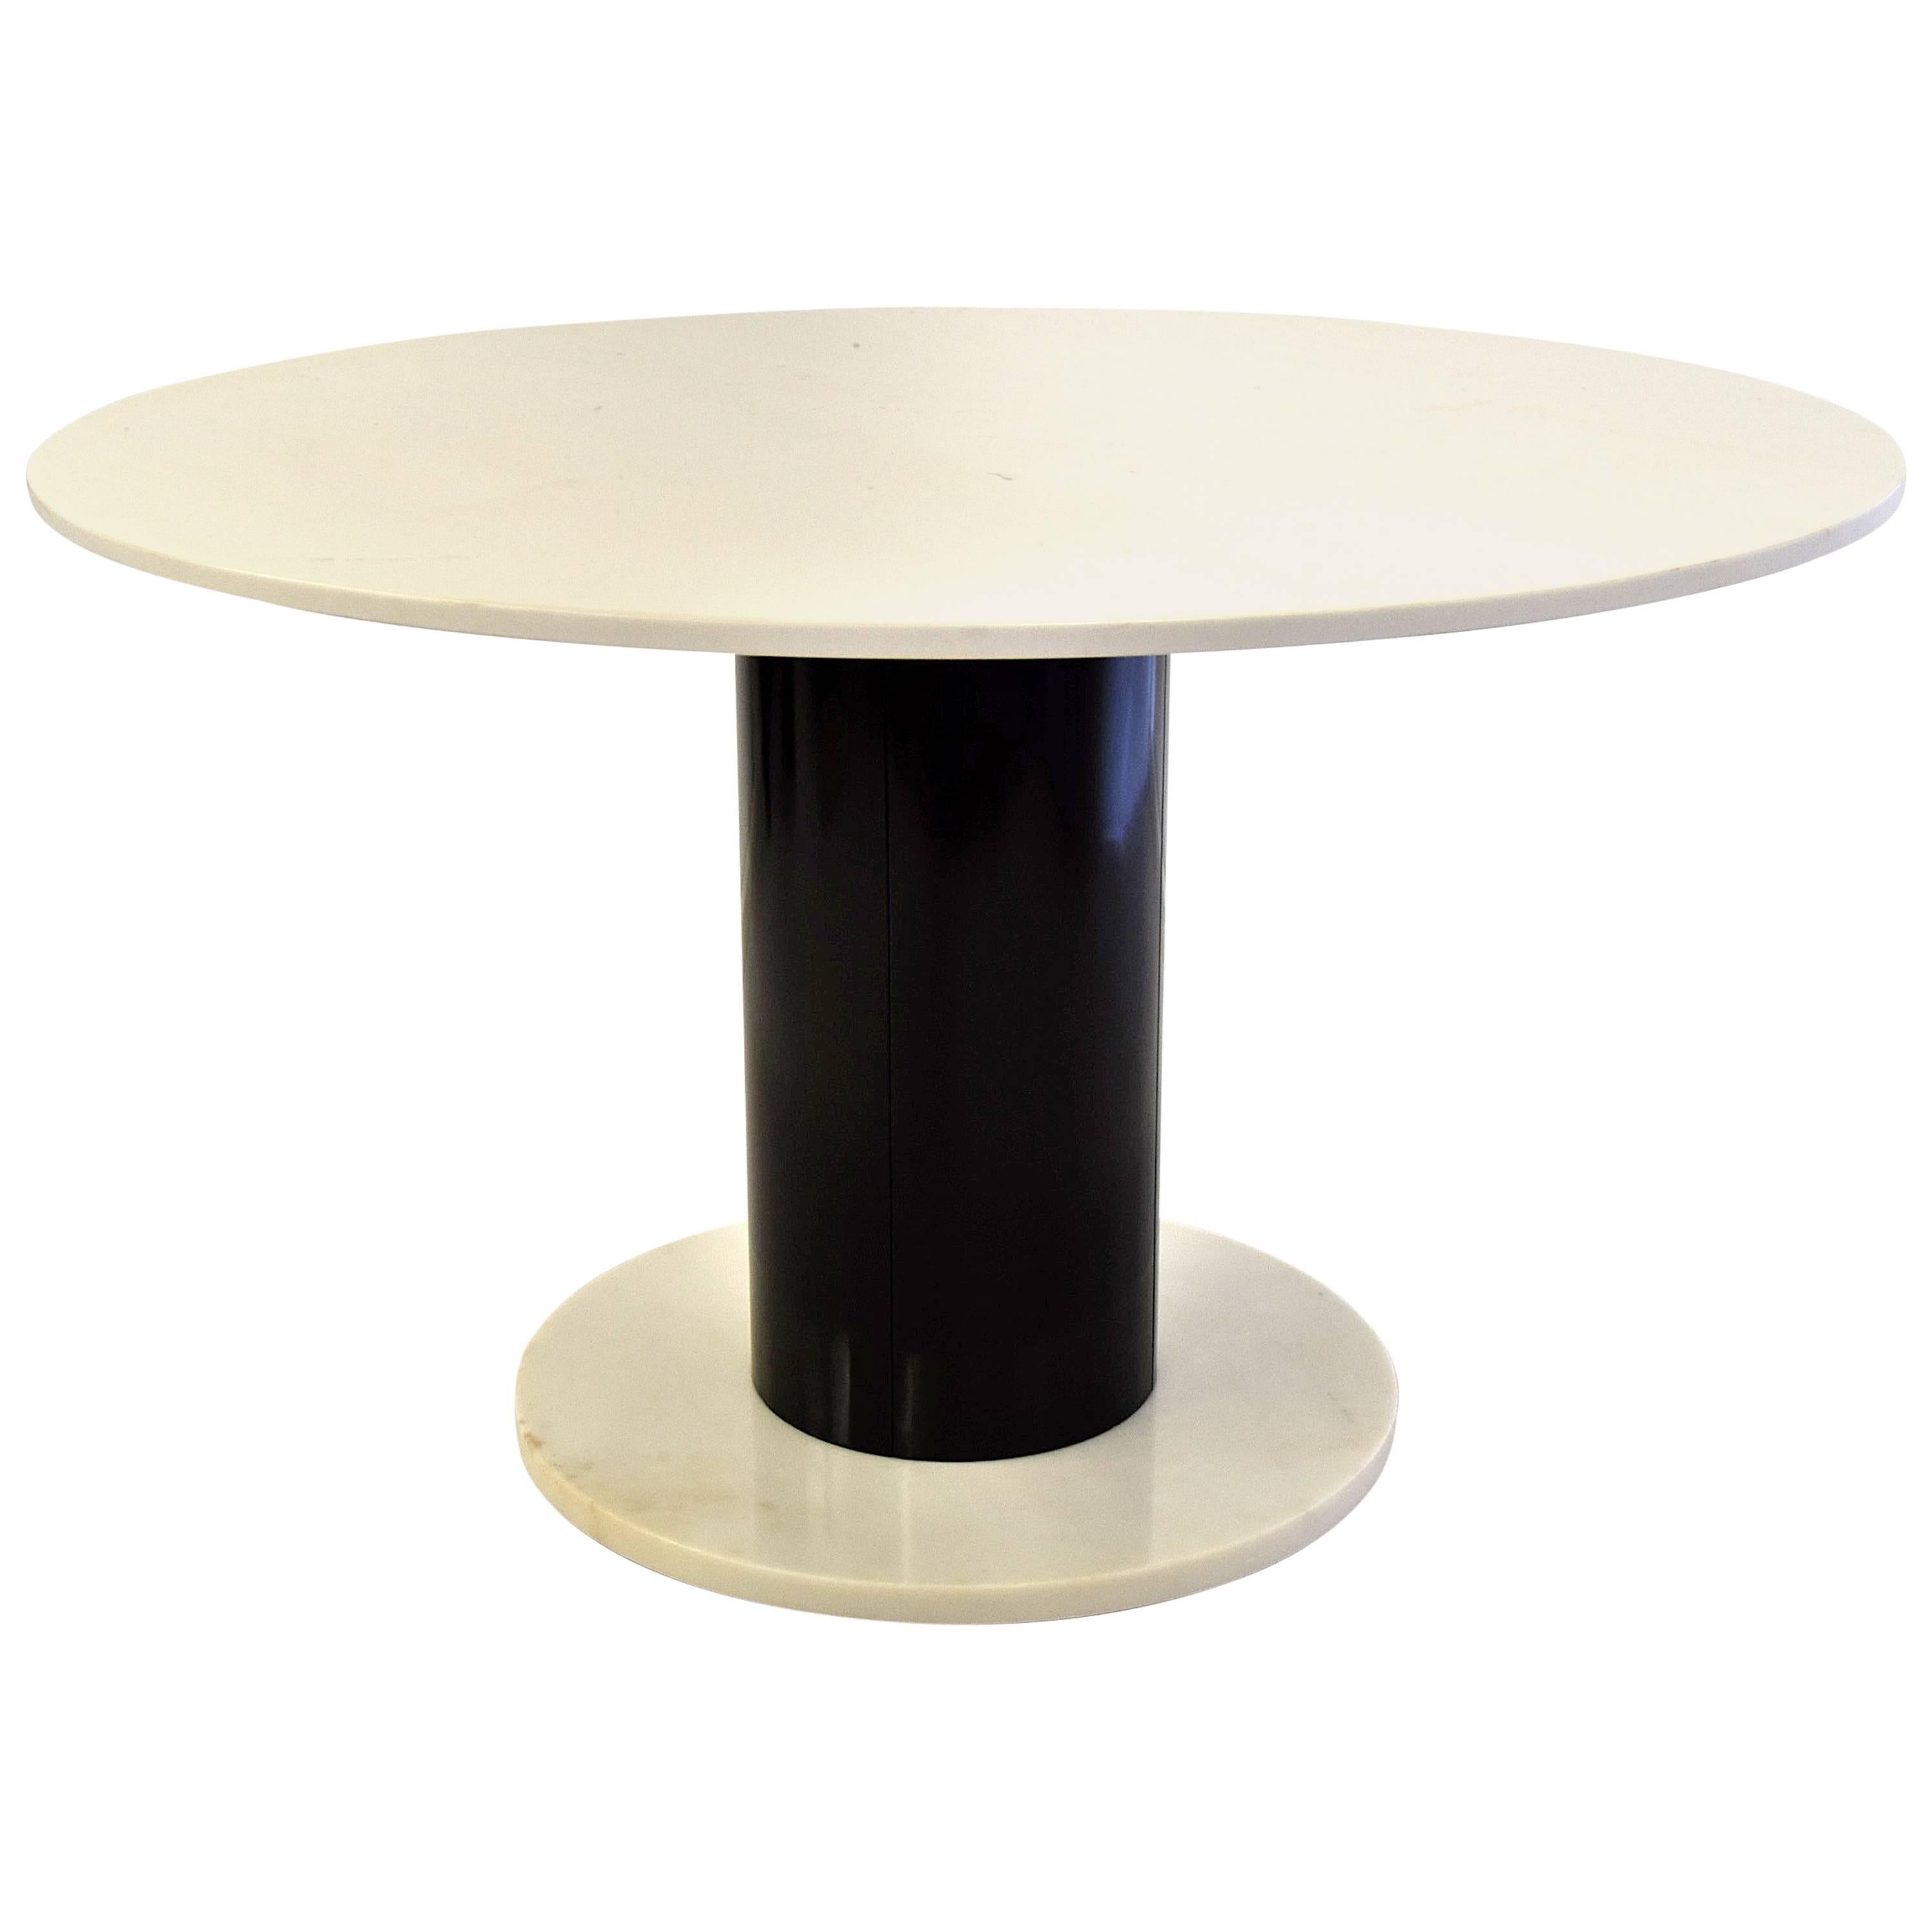 Ettore Sottsass "Super Loto" Marble-Top Dining Table for Poltronova, 1971